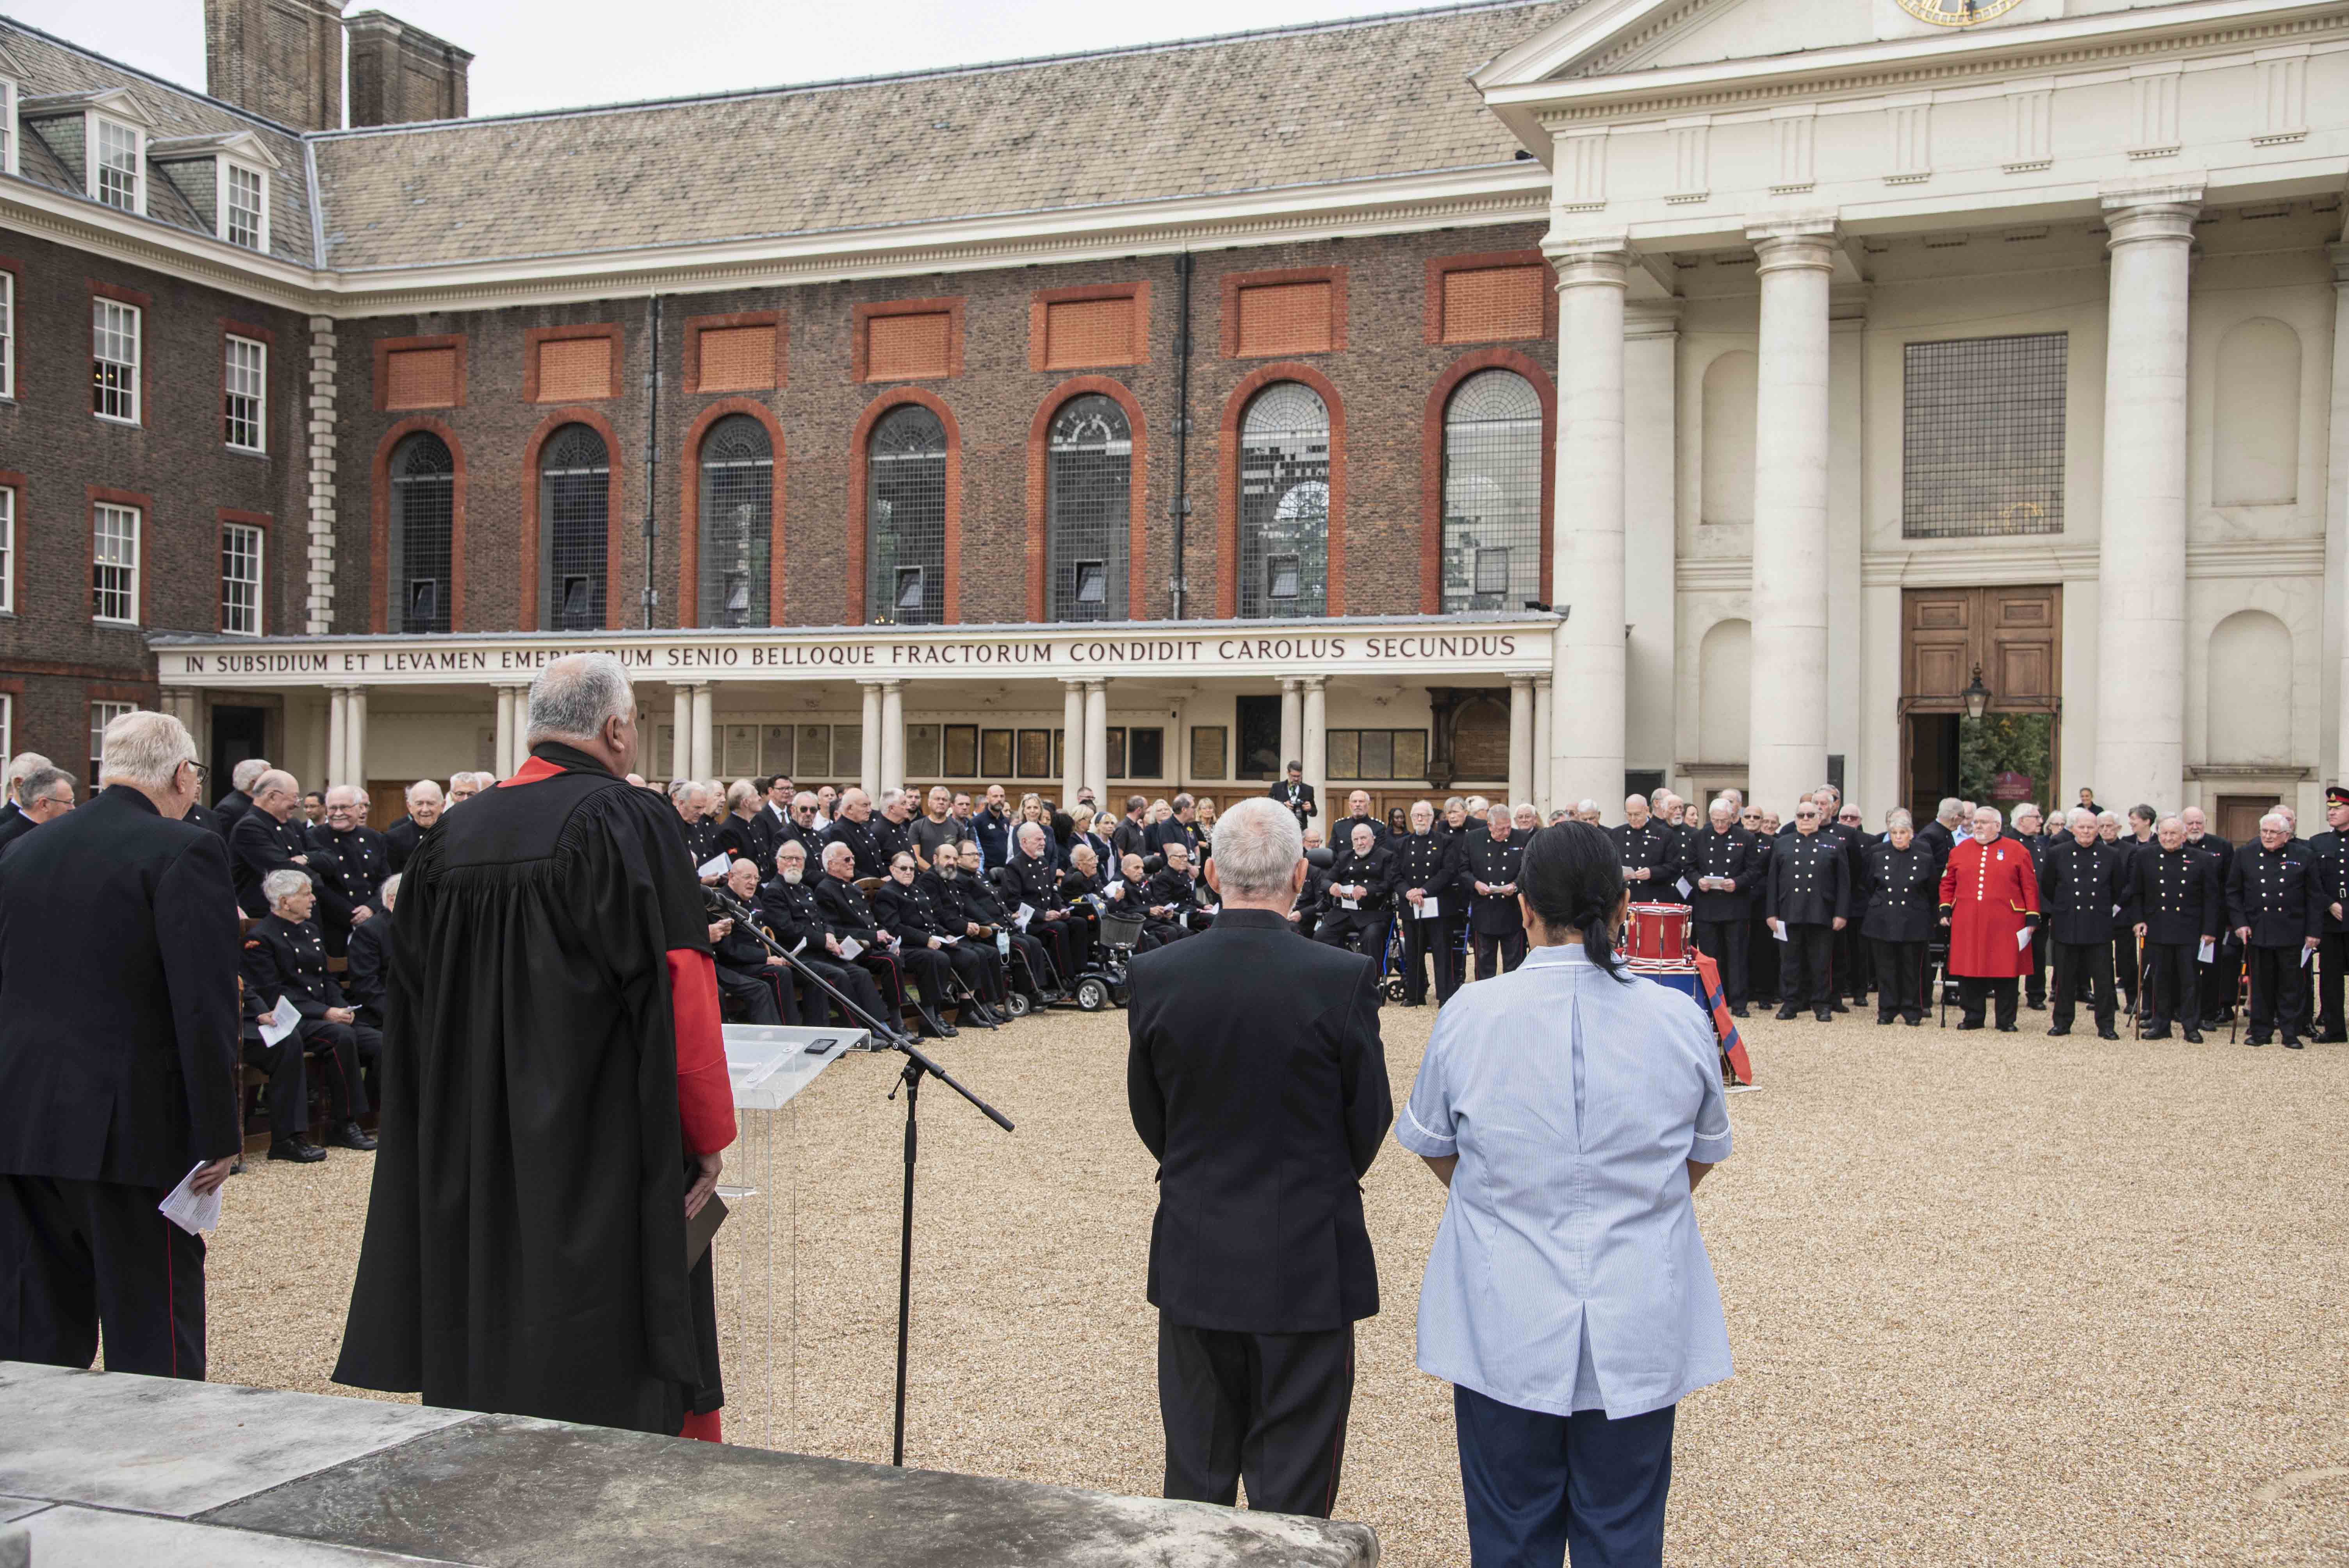 Drumhead service in Figure Court, Royal Hospital Chelsea